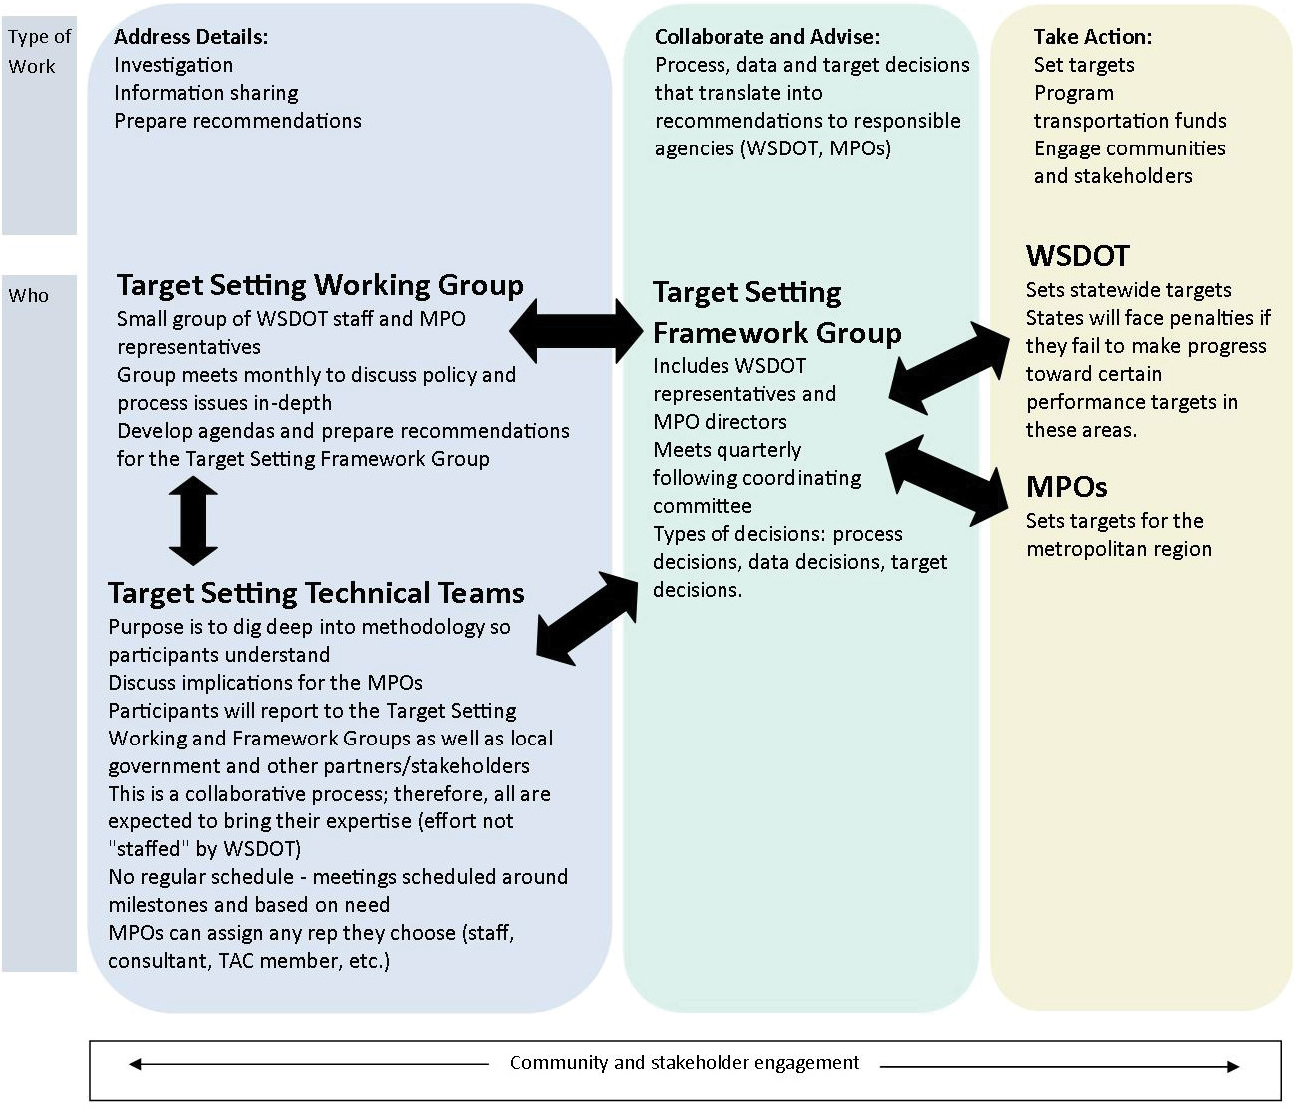 Depiction of relationship between target setting working group and target setting framework group and target setting technical teams, which all work in an interconnected way. Community and stakeholder engagement undertaken throughout processes. Target setting framework group works with WSDOT and MPOs.